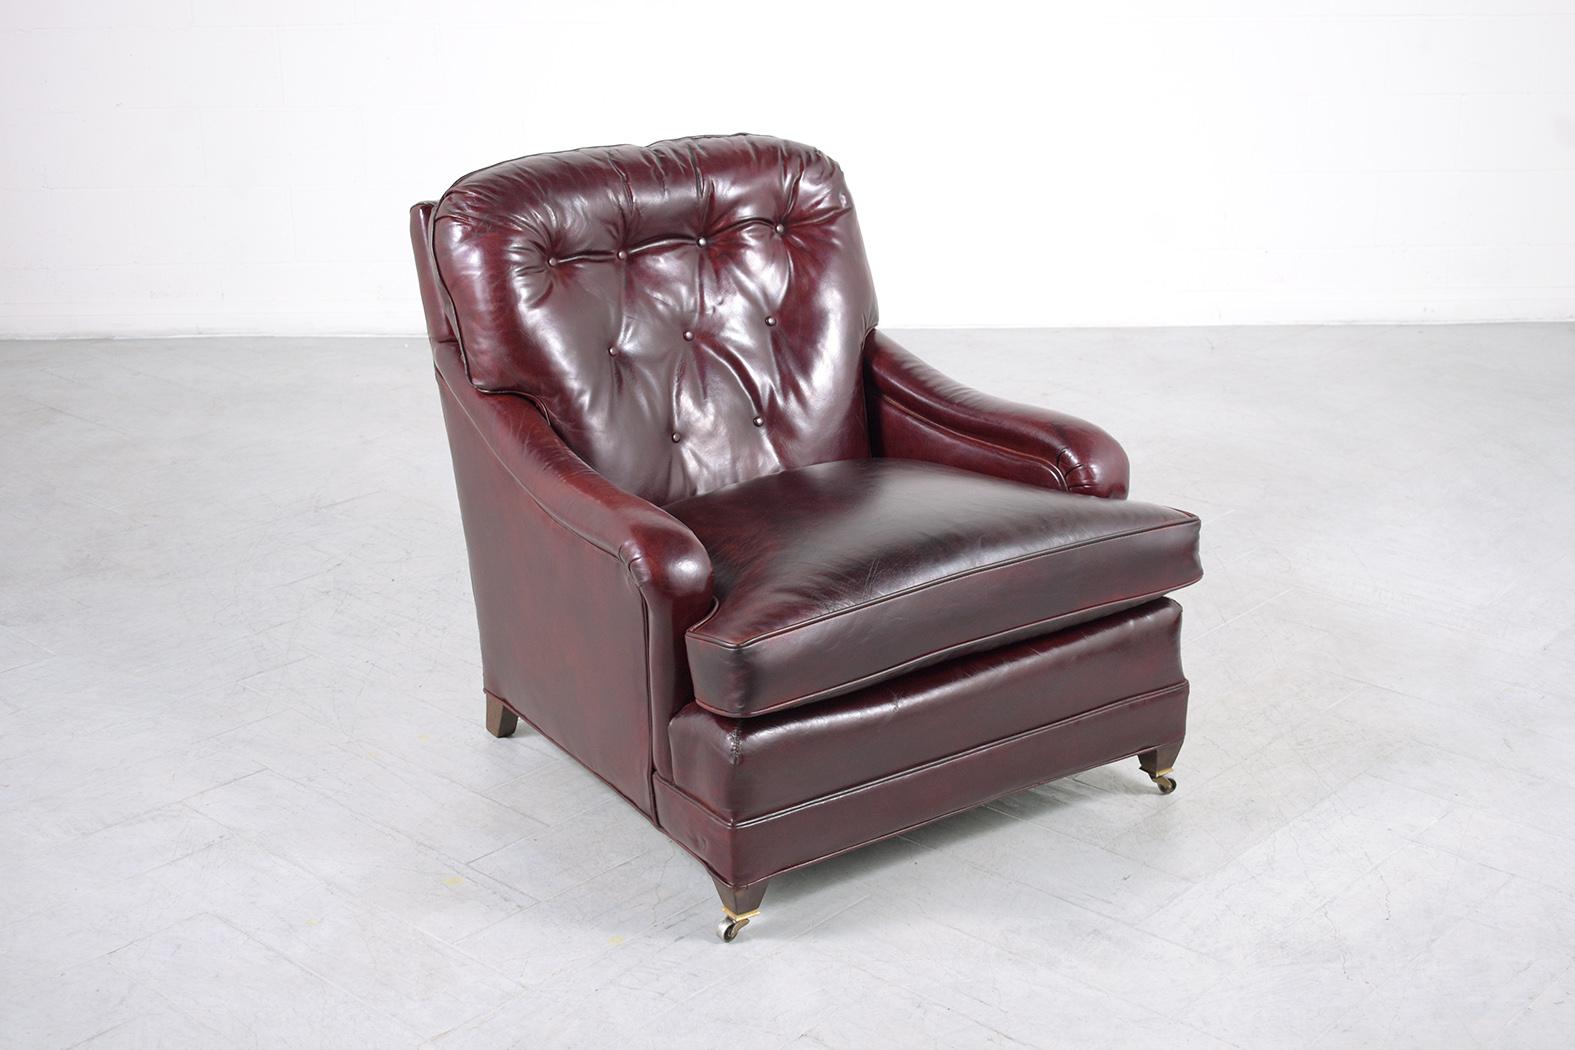 Lacquer Early 1900s Antique English Chesterfield Chair in Deep Cordova Leather